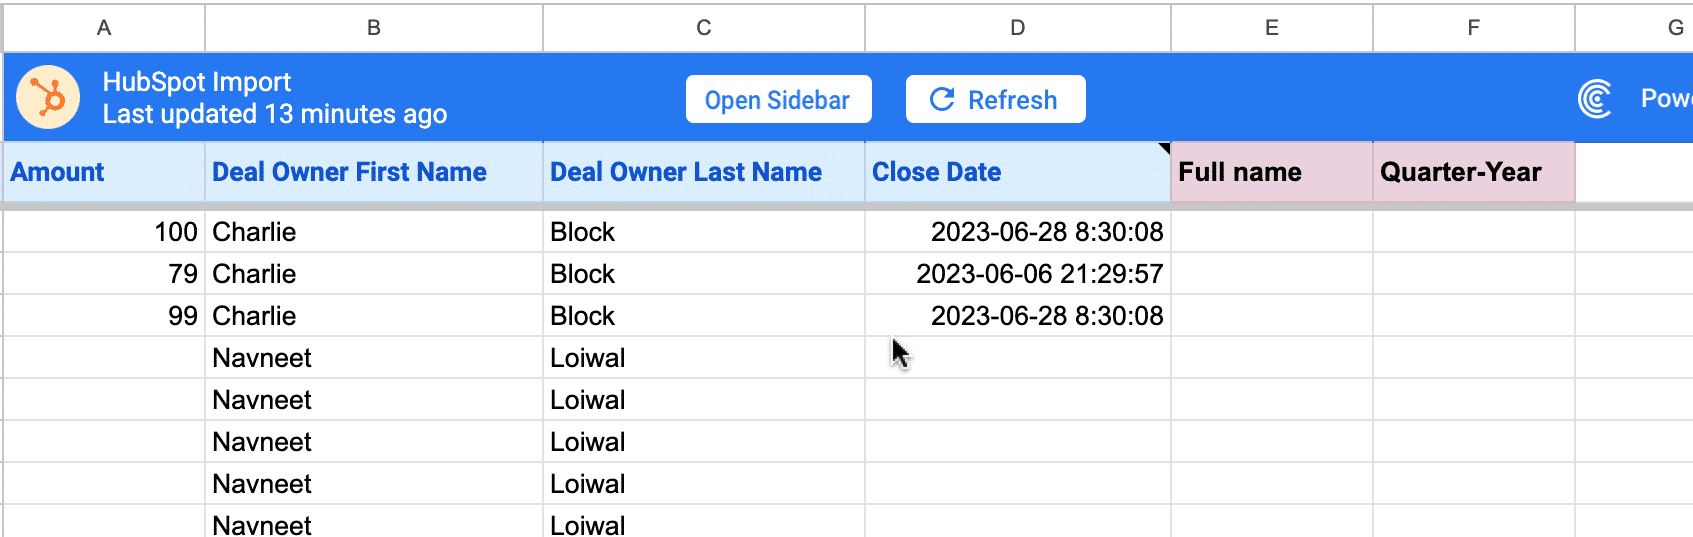  Create two new columns, ‘Full name’ and ‘Quarter-Year,’ in cells 2E and 2F.